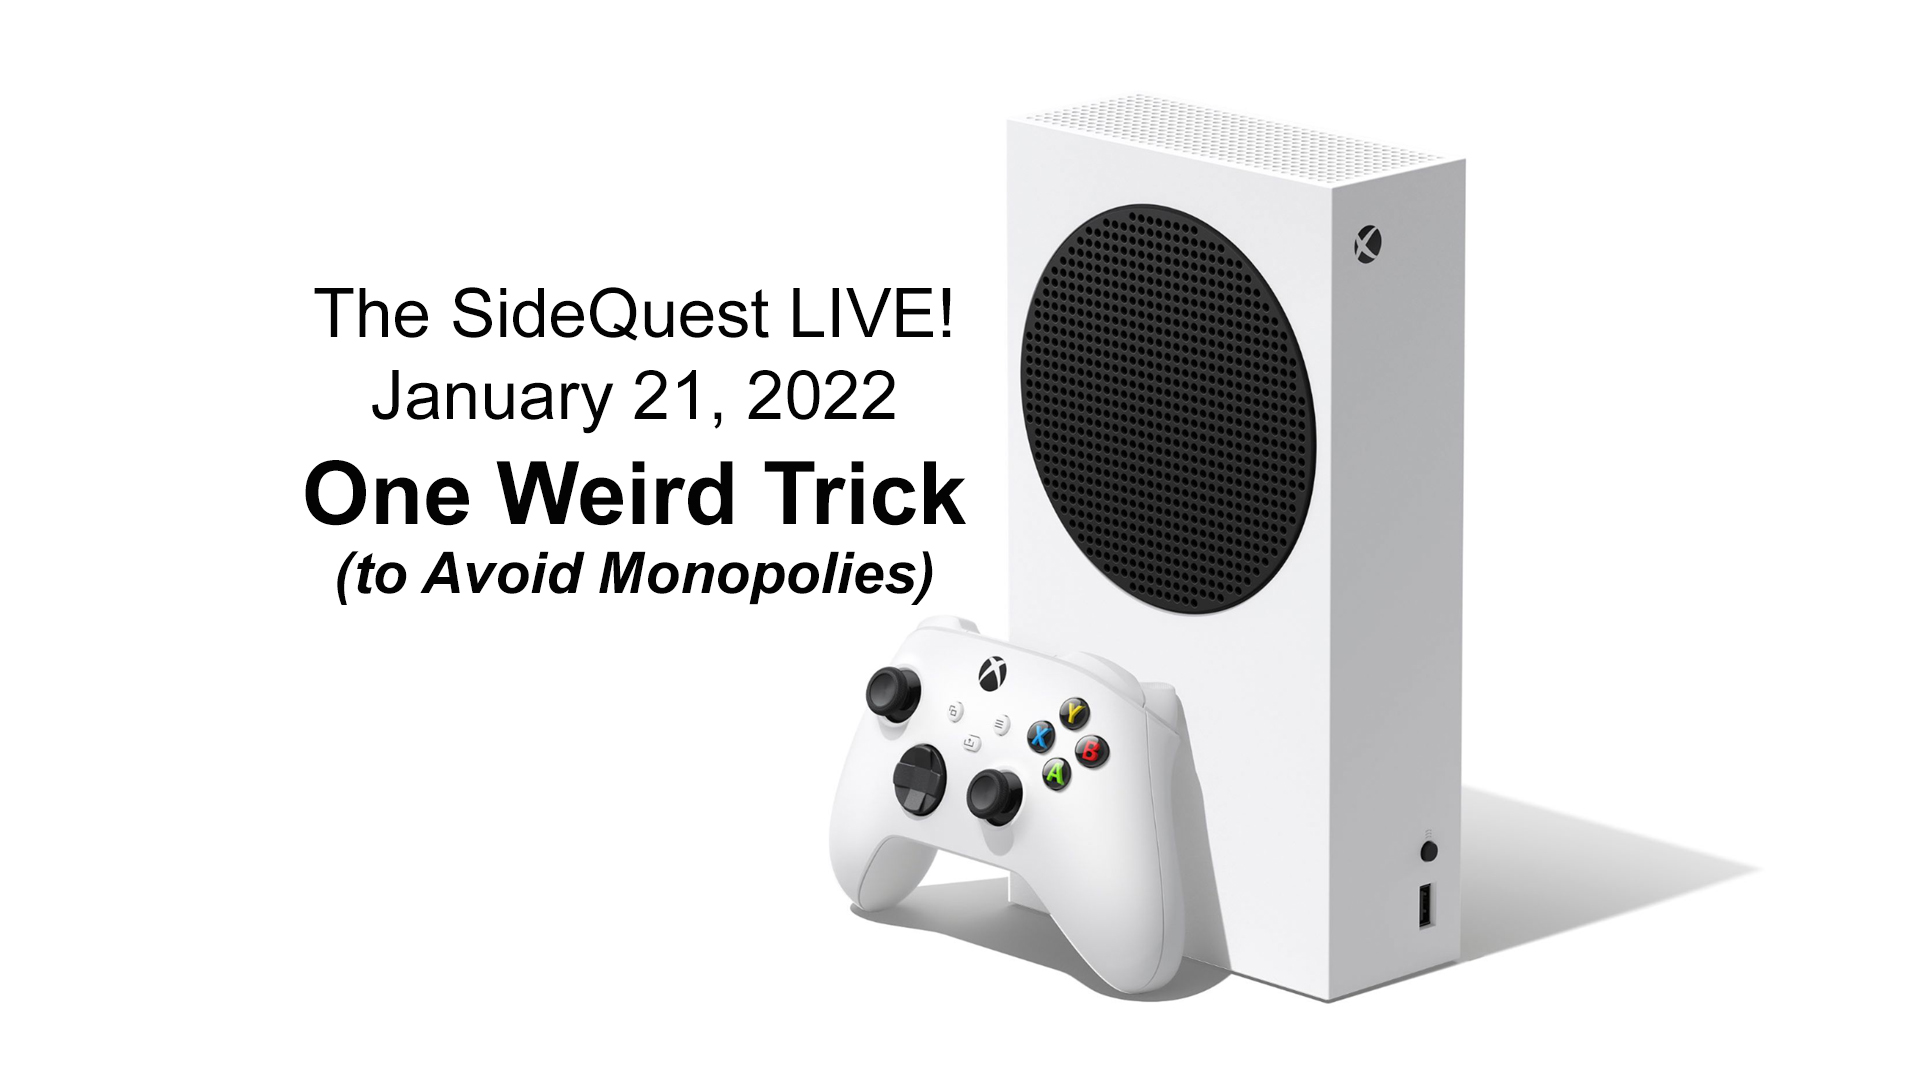 The SideQuest LIVE! January 21, 2022: One Weird Trick to Avoid Monopolies